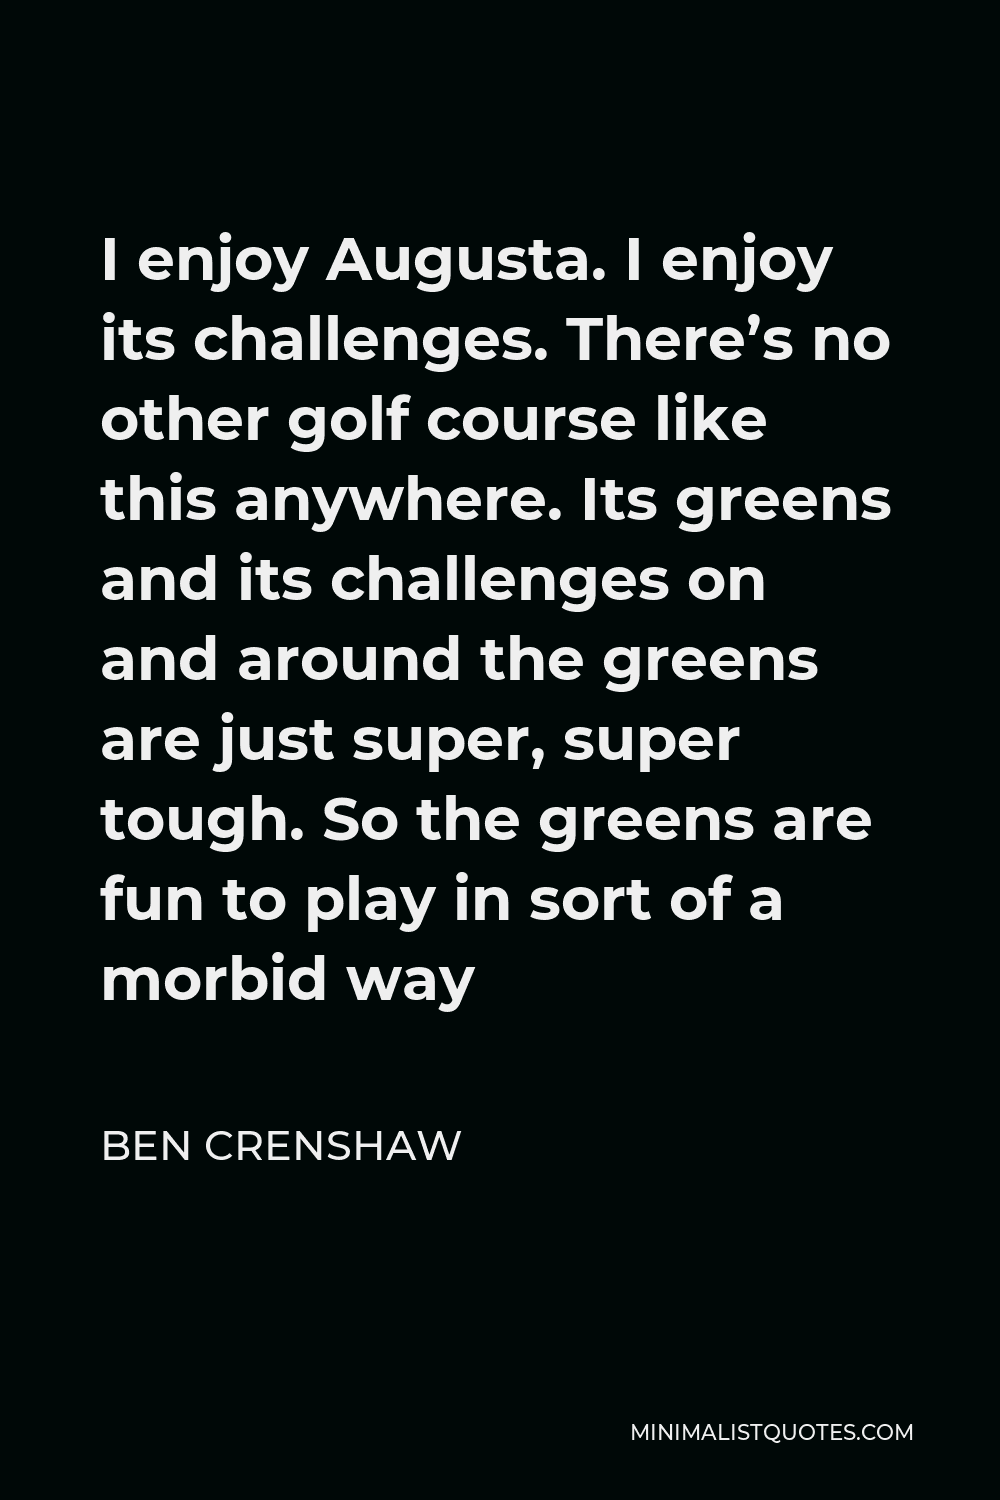 Ben Crenshaw Quote - I enjoy Augusta. I enjoy its challenges. There’s no other golf course like this anywhere. Its greens and its challenges on and around the greens are just super, super tough. So the greens are fun to play in sort of a morbid way